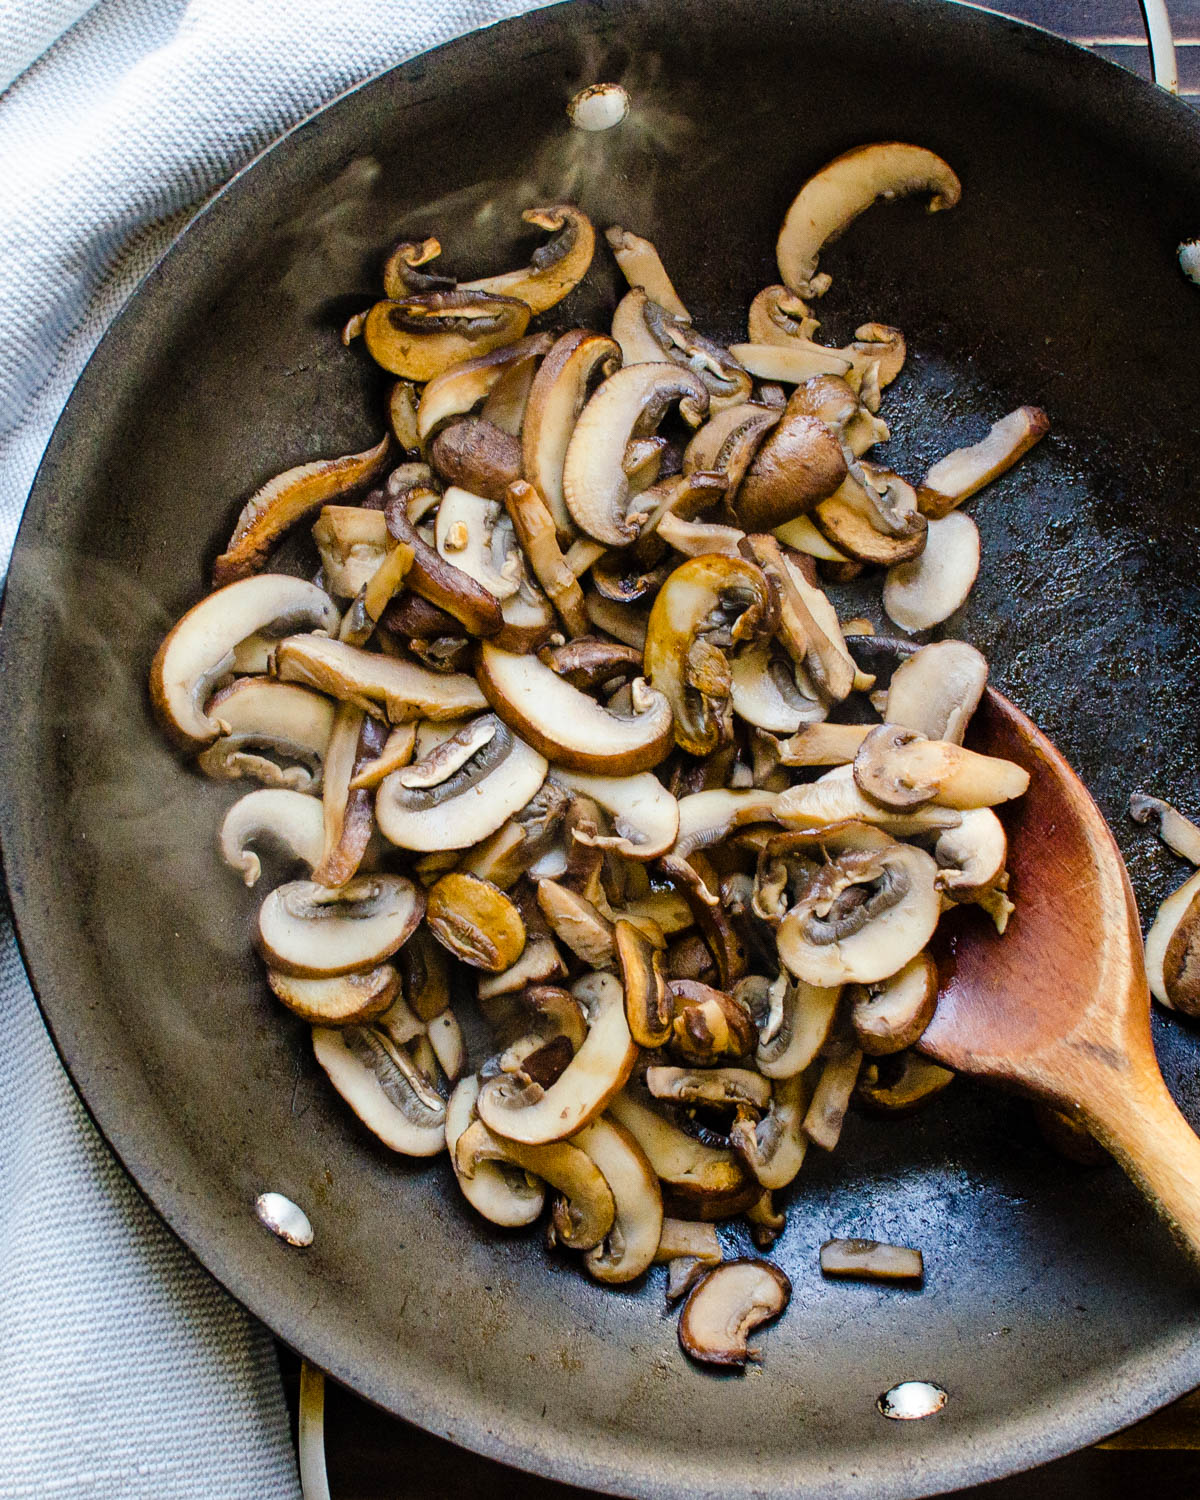 Cooking mushrooms in a skillet.